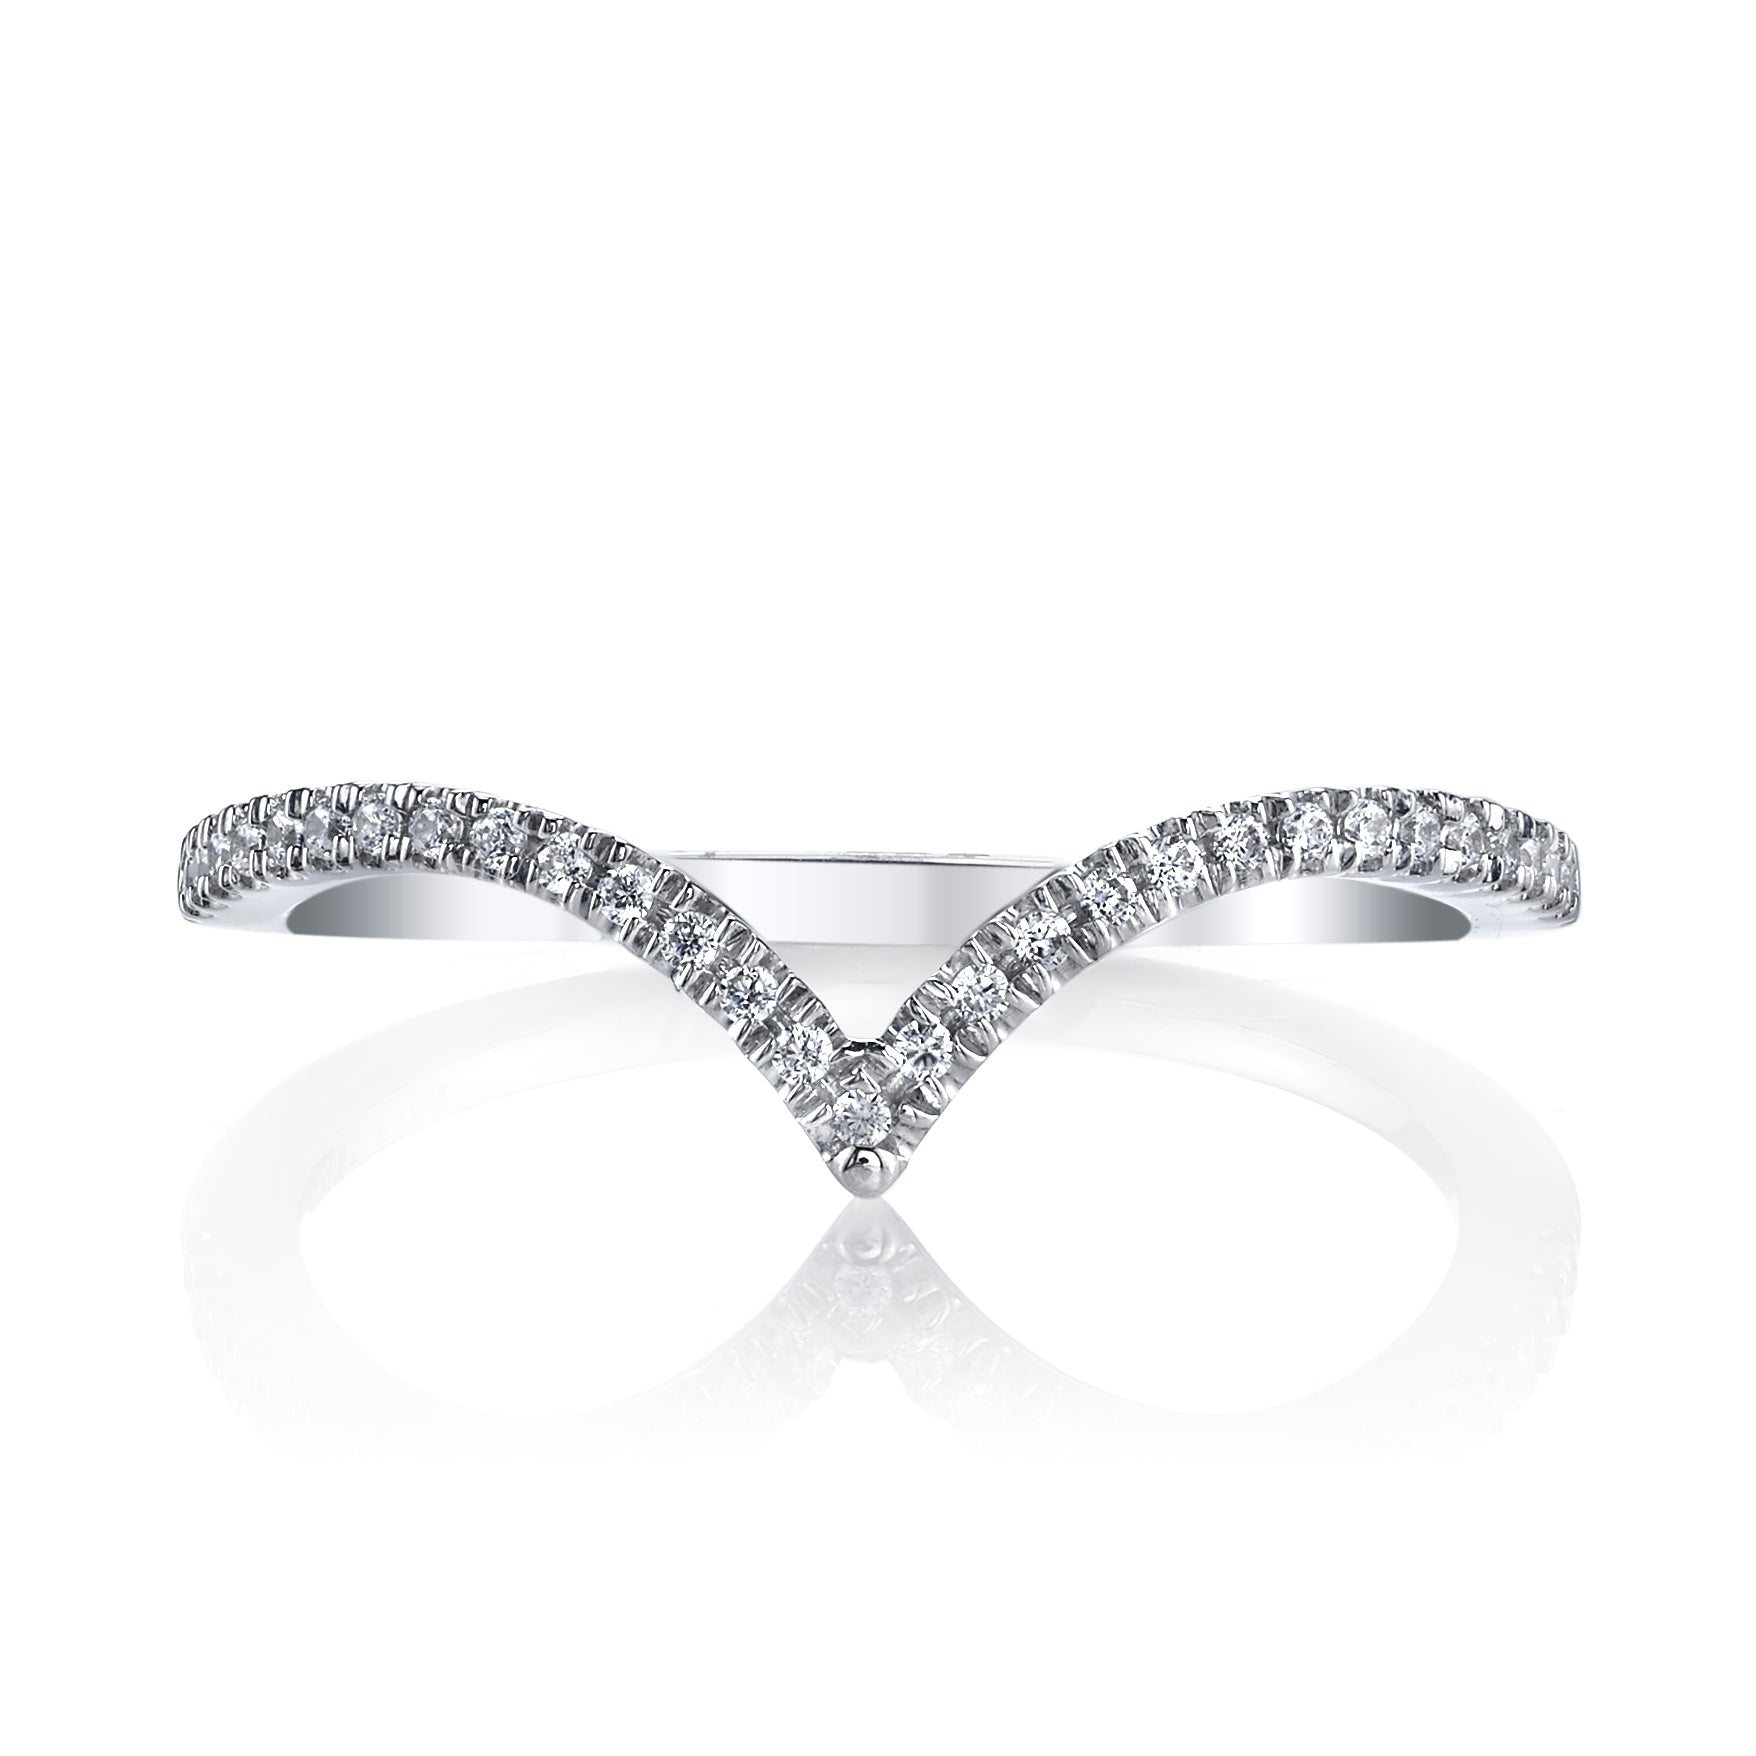 14K White Gold 0.11ct. Curving Diamond Accent Fashion Ring